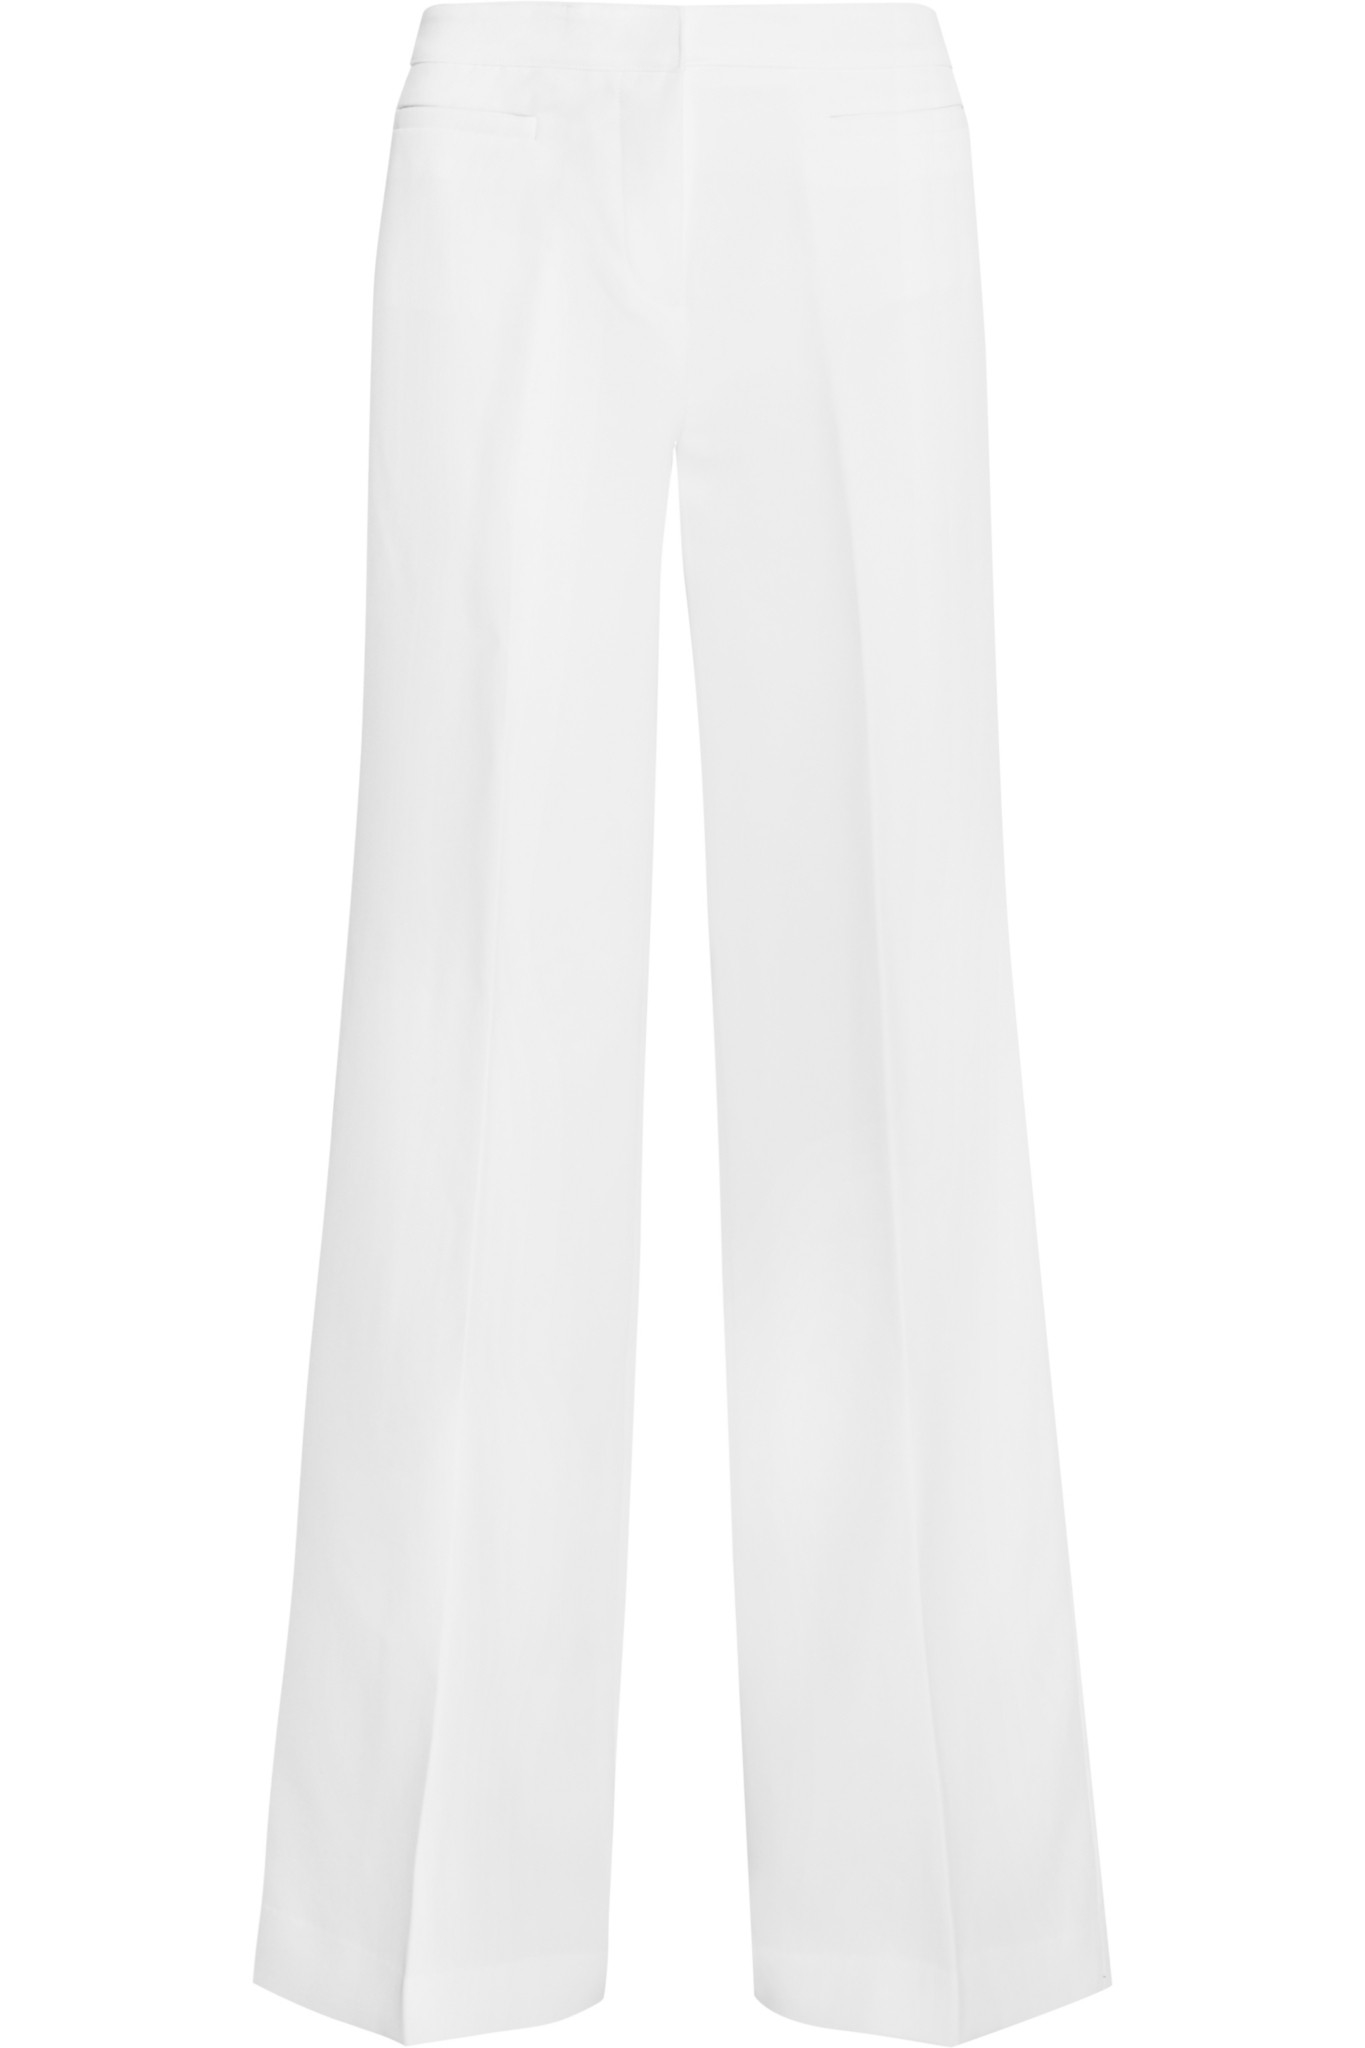 MICHAEL Michael Kors Synthetic Stretch 